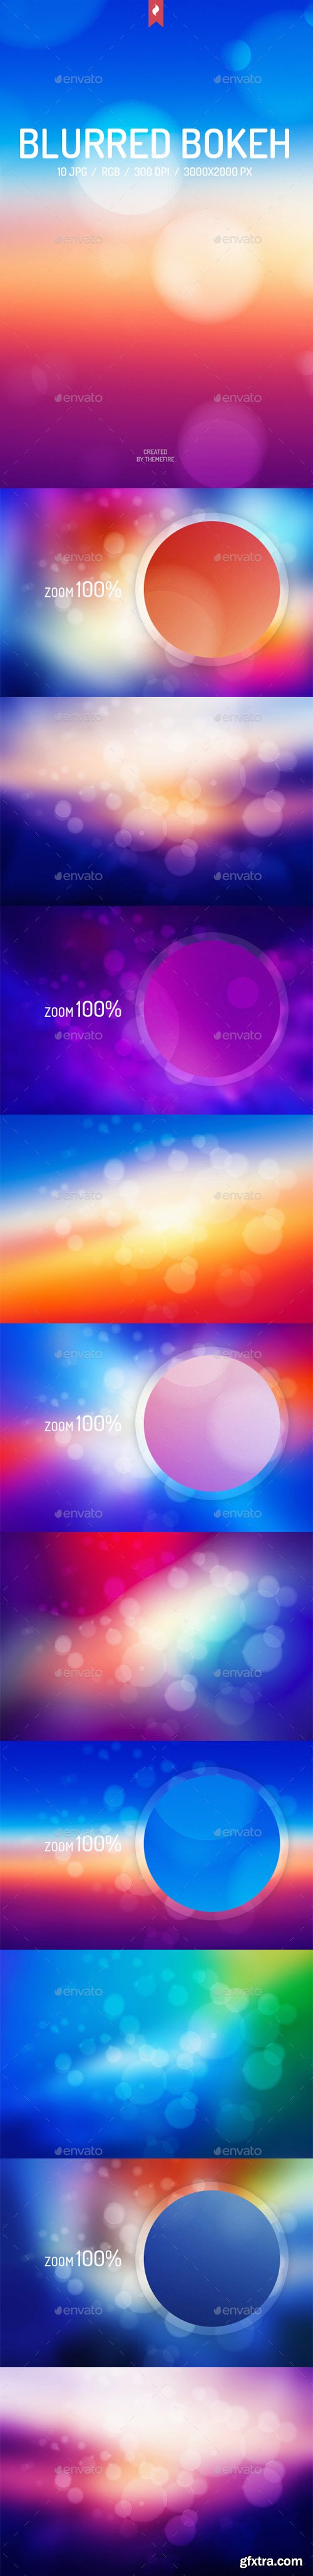 GR - Colorful Blurred Bokeh Backgrounds 13523569